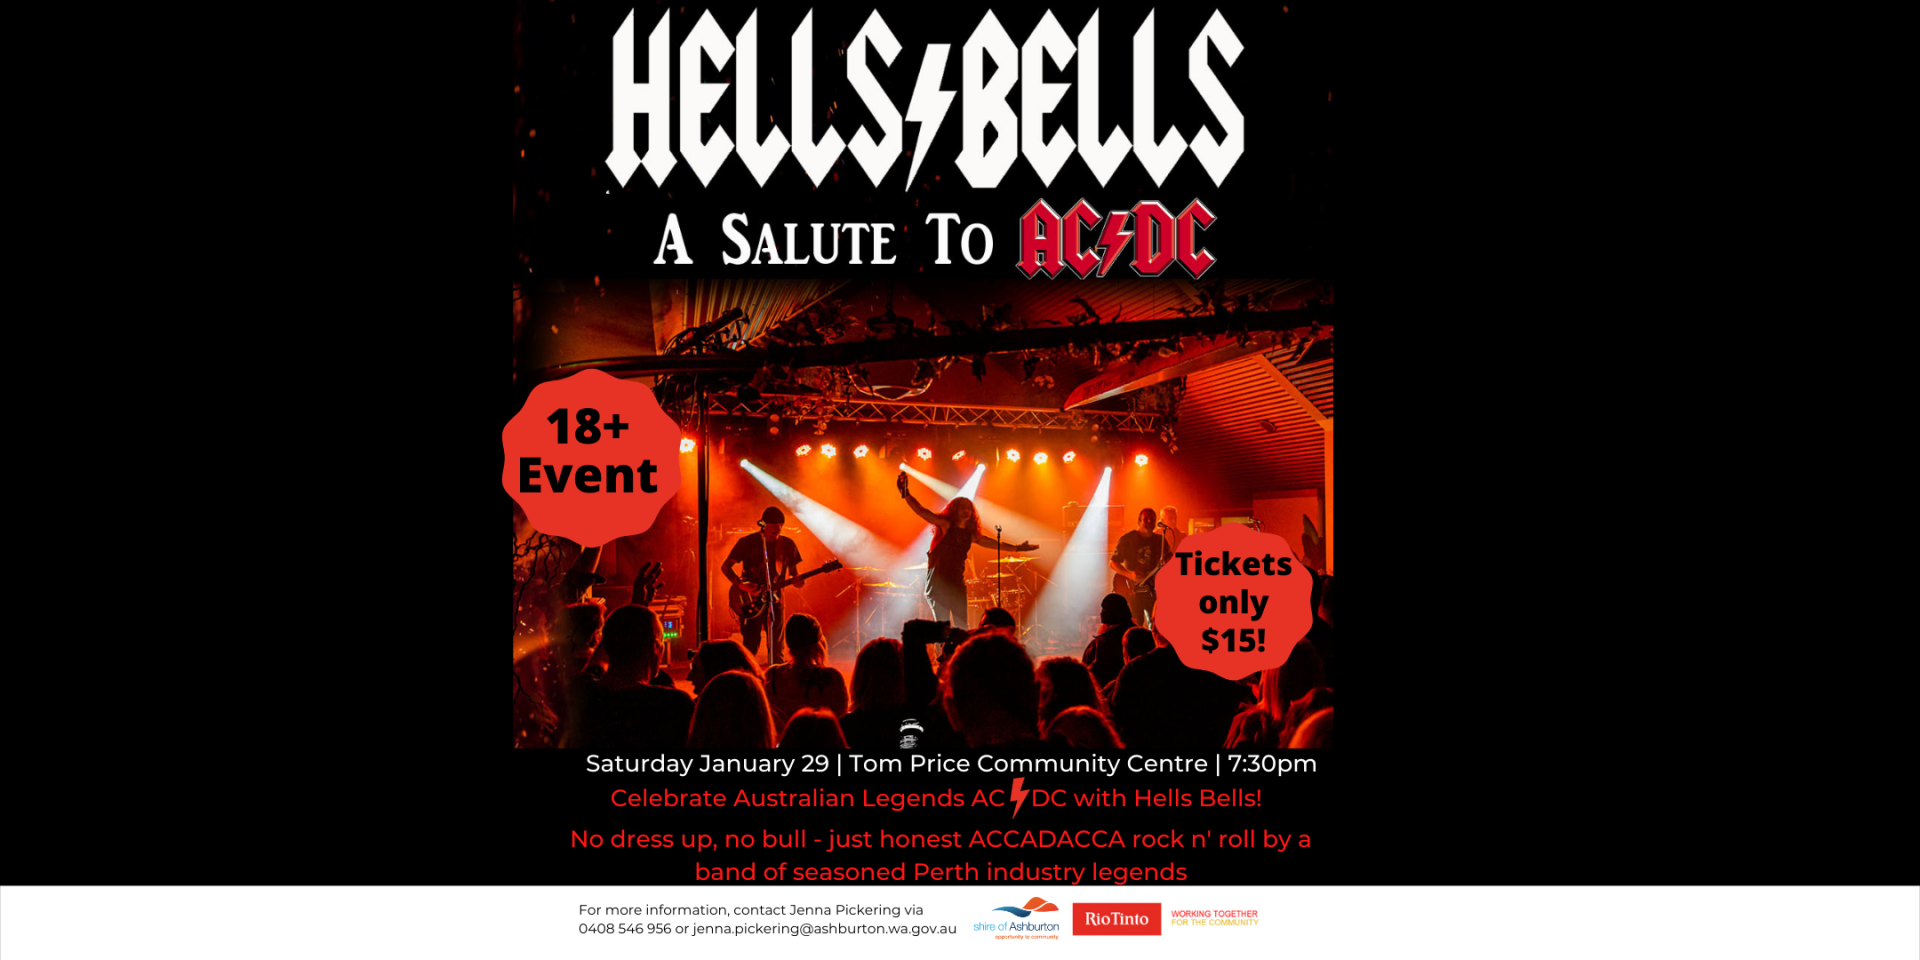 Hells Bells - A Salute to AC/DC